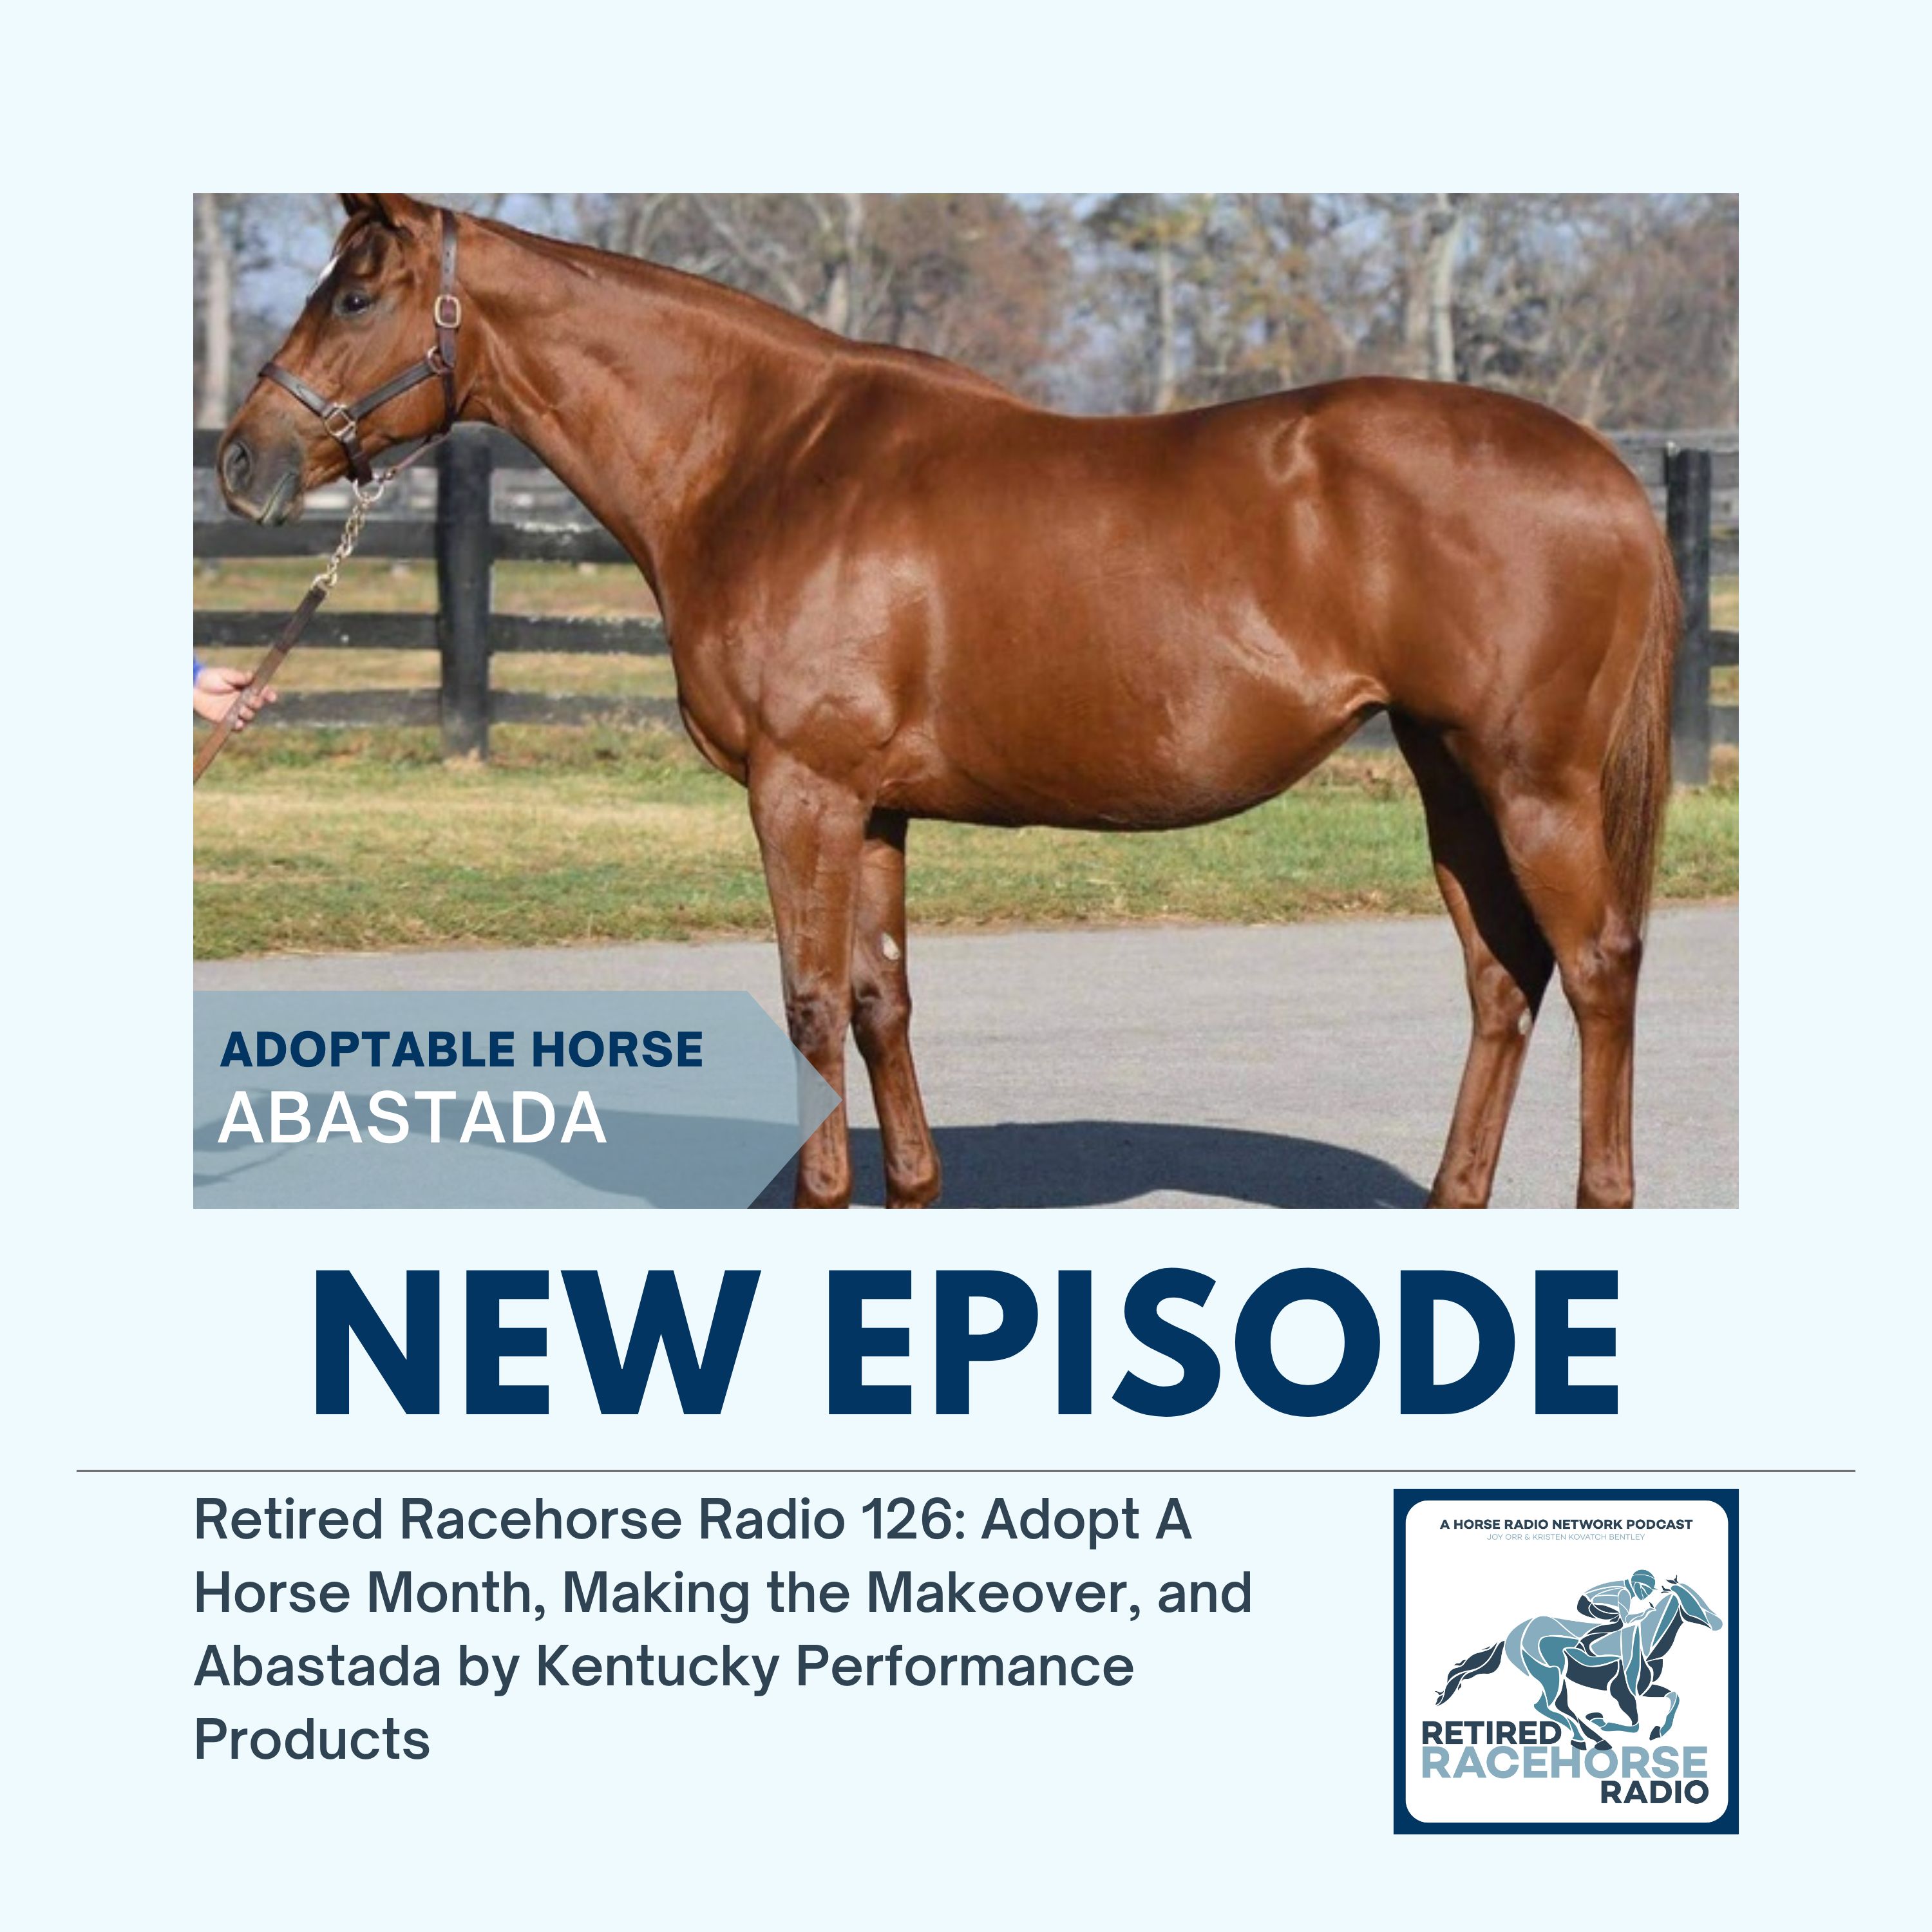 Retired Racehorse Radio 126: ASPCA Adopt a Horse Month, Making the Makeover, and Abastada by Kentucky Performance Products